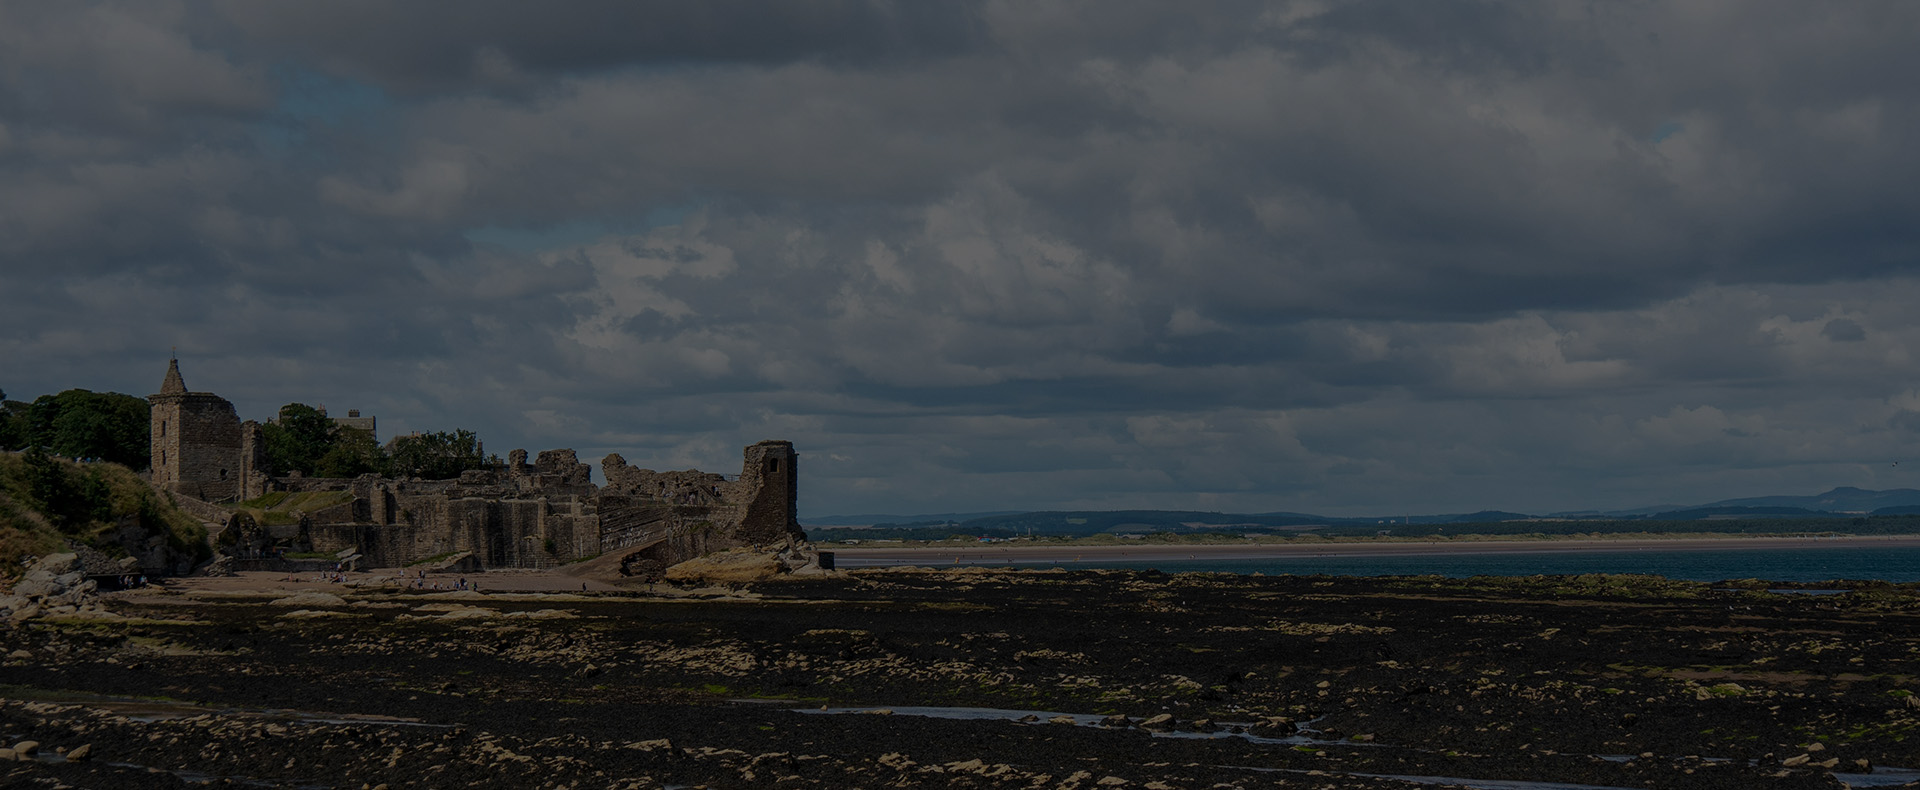 The ruins of St Andrews Castle in Scotland by the coast with rocks in front and a sandy beach behind.